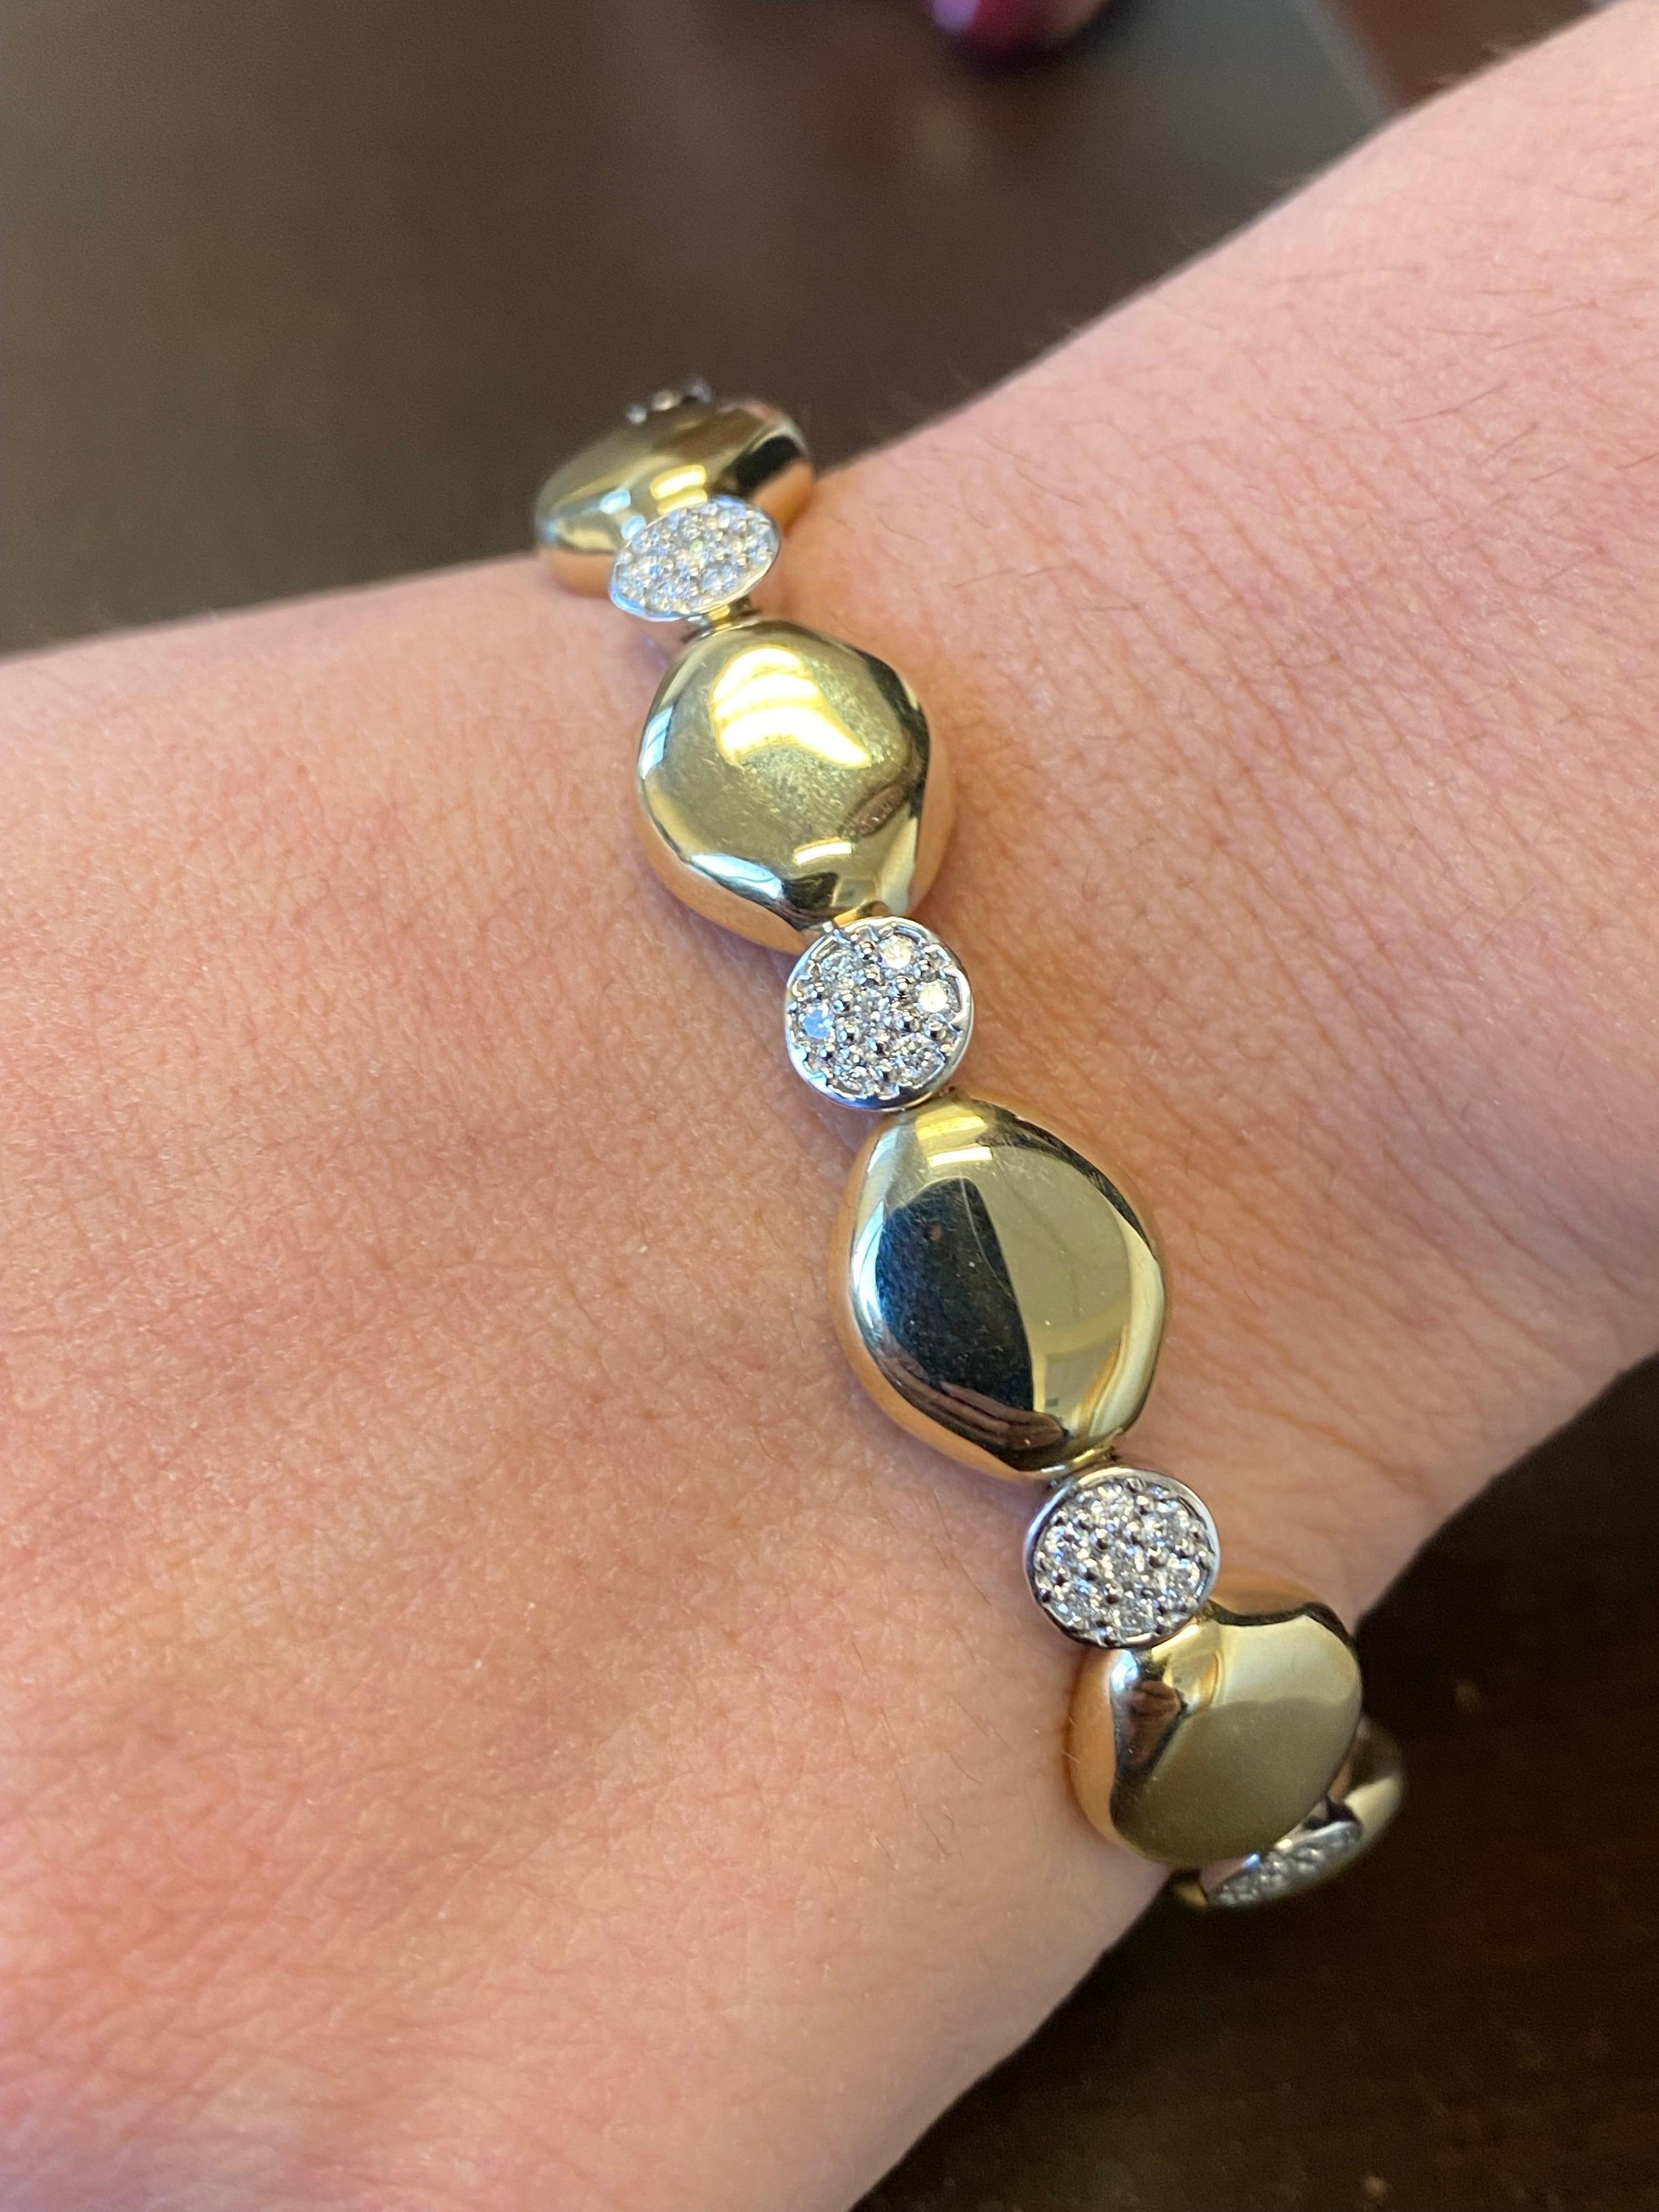 Italian made bangle set in a 2 tone white and yellow gold 14K. The bangle is set with 35 stones, total carat weight is 0.70 carats. The color of the stones are G-H, the clarity is SI1-SI2.